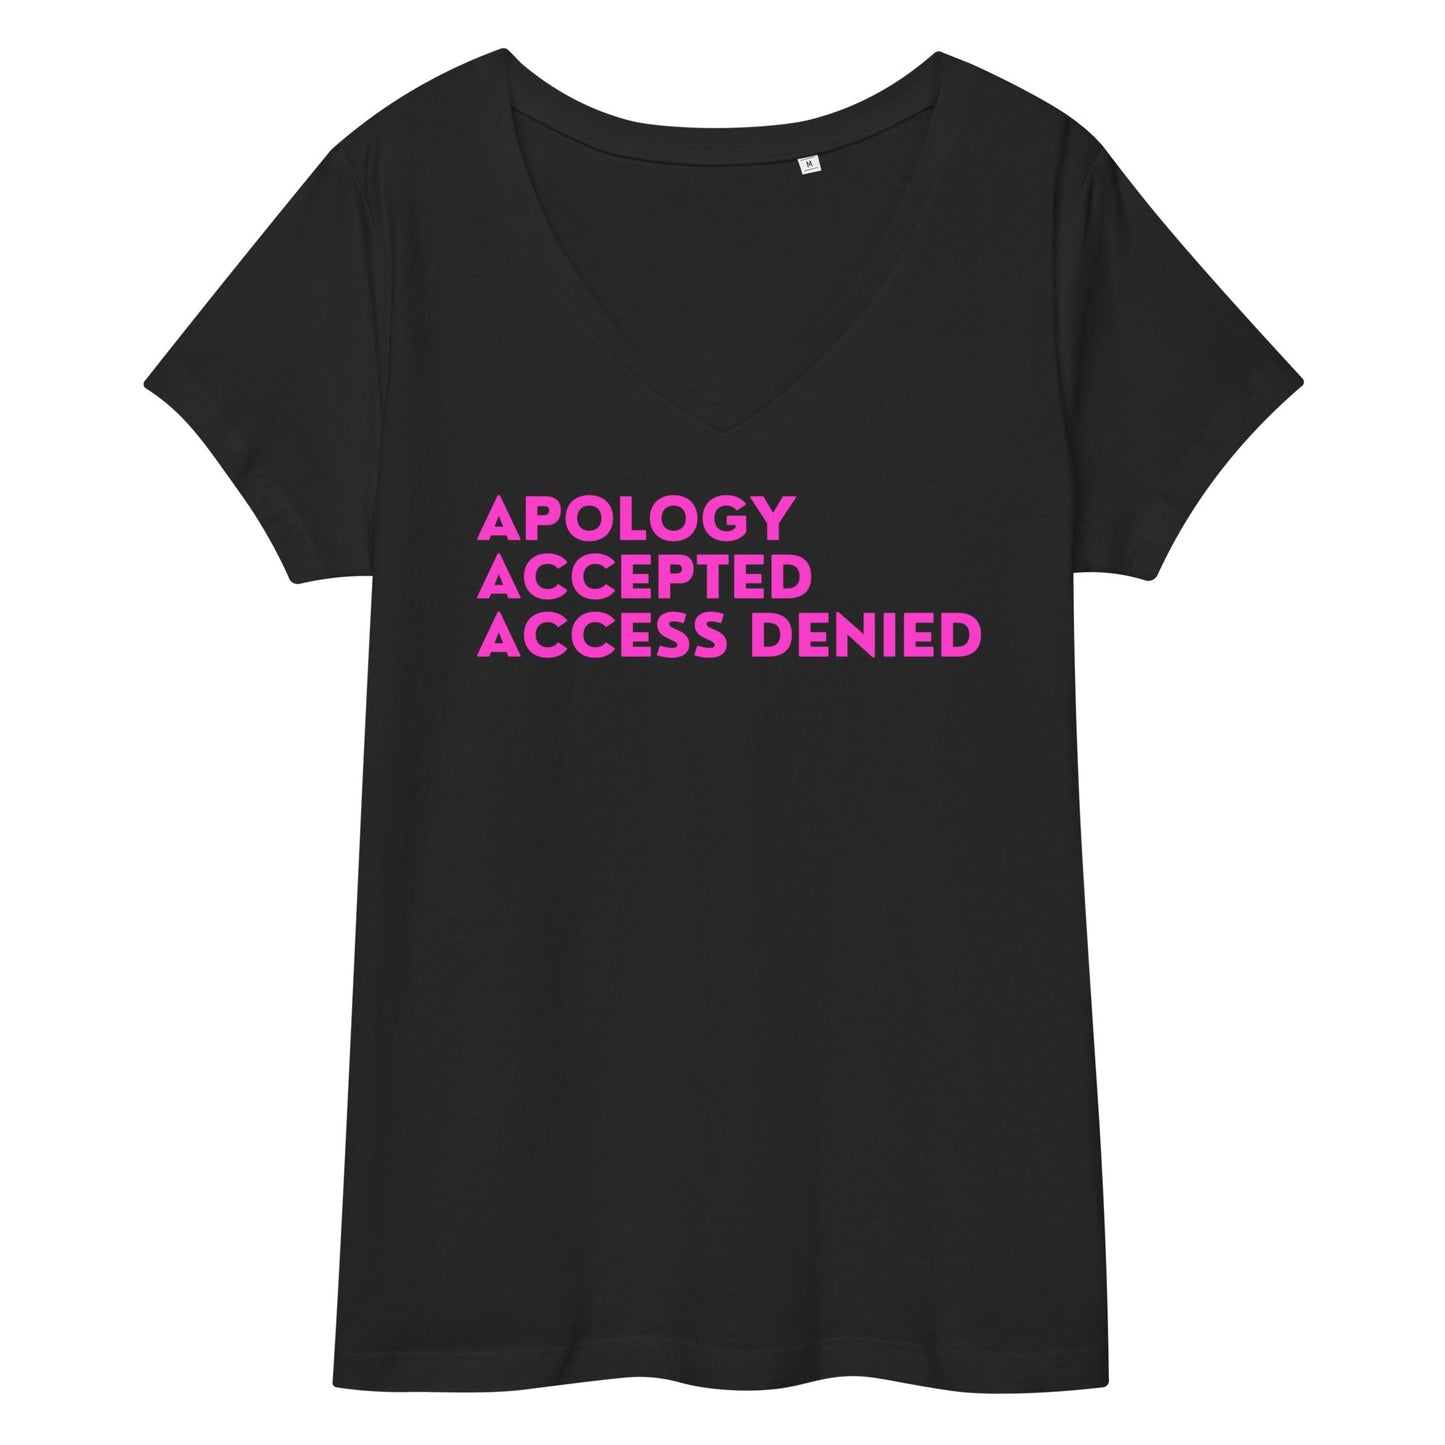 Apology Accepted Access Denied Women’s fitted v-neck t-shirt - Catch This Tea Shirts